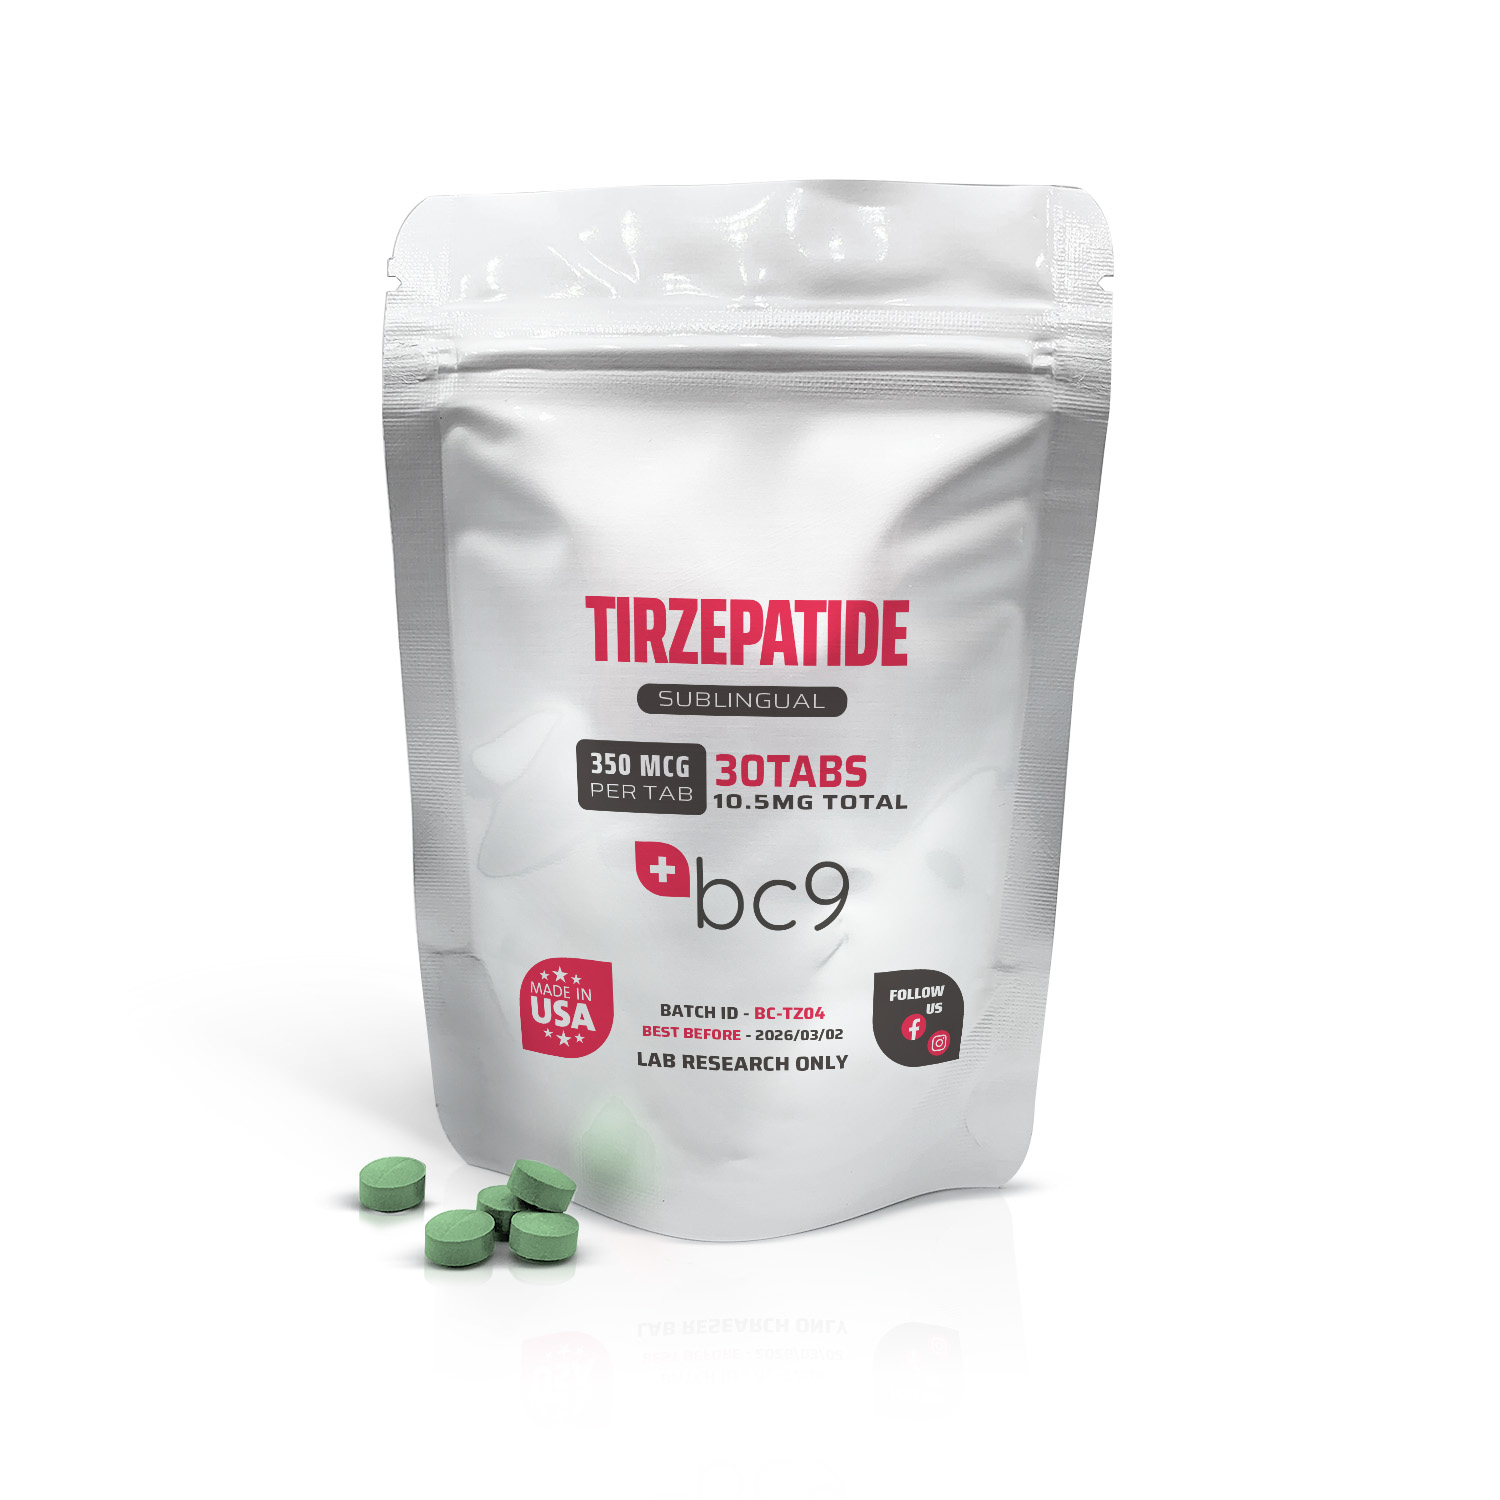 Tirzepatide Sublingual Tablets For Sale | BC9.org